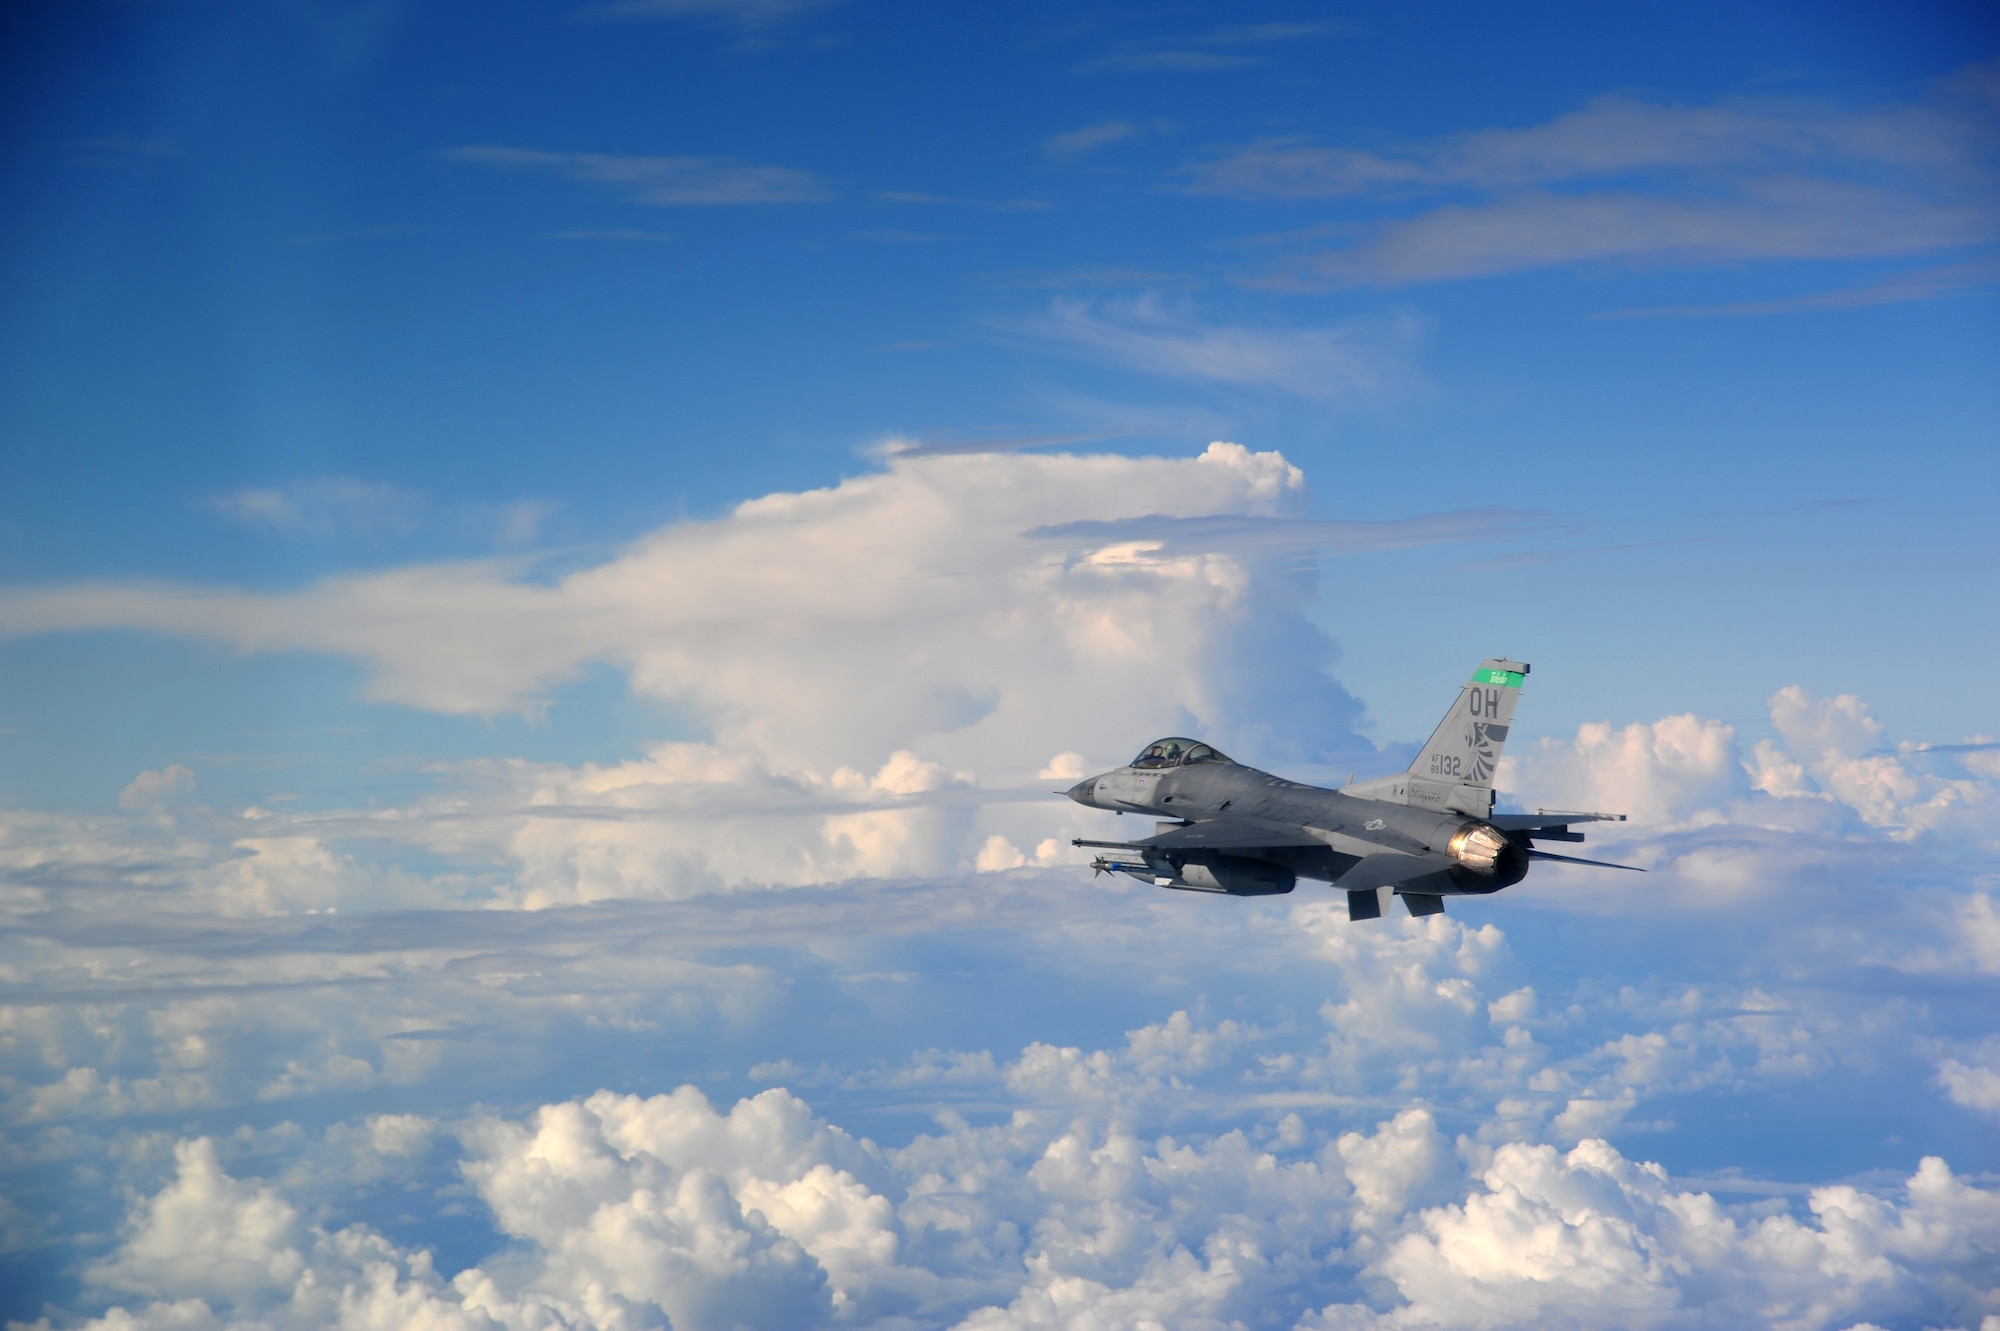 Lt. Col. Scott Schaupeter, an F-16 pilot with the 180th Fighter Wing, Ohio Air National Guard, flies an air-to-air sortie over the Gulf of Mexico Sept. 17, 2015. About 120 Airmen from the 180th FW traveled to Tyndall to participate in the Combat Archer exercise, a weapons system evaluation program designed to test the effectiveness of our Airmen and air-to-air weapon system capability of our F-16s and other combat aircraft. Training allows our pilots to provide a vital link for the defense of our country. Air National Guard photo by Maj. Garrick Webb/Released